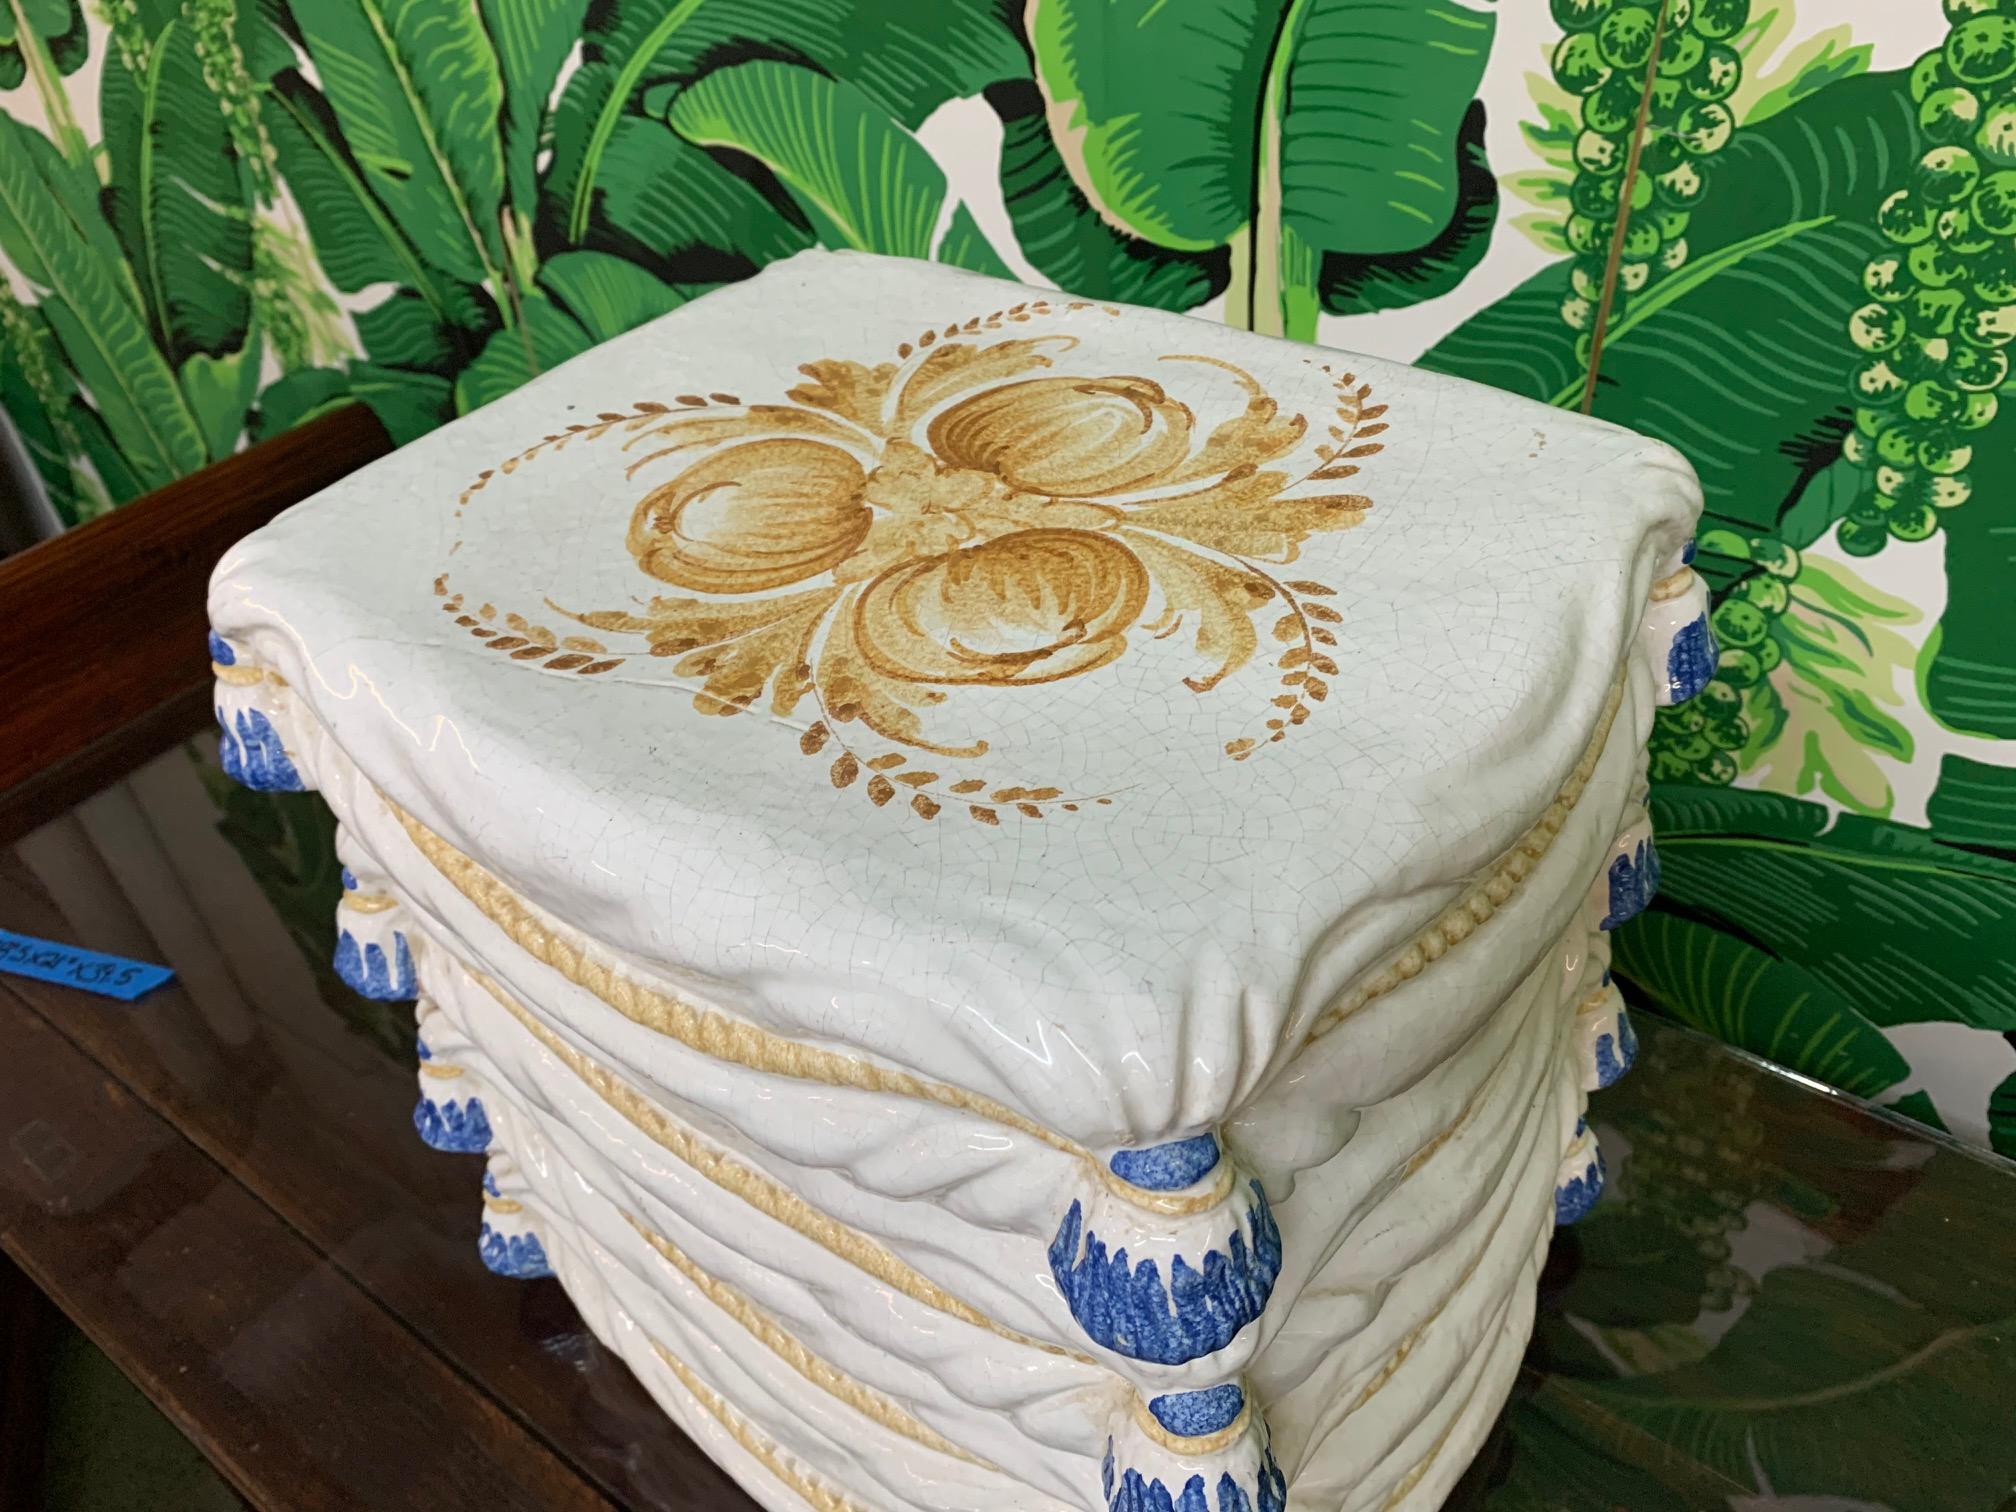 Vintage ceramic garden stool features hand painted detailing and a stacked pillow motif. Can be a footstool or decorative ottoman. Very heavy. Very good condition with only very minor imperfections consistent with age.